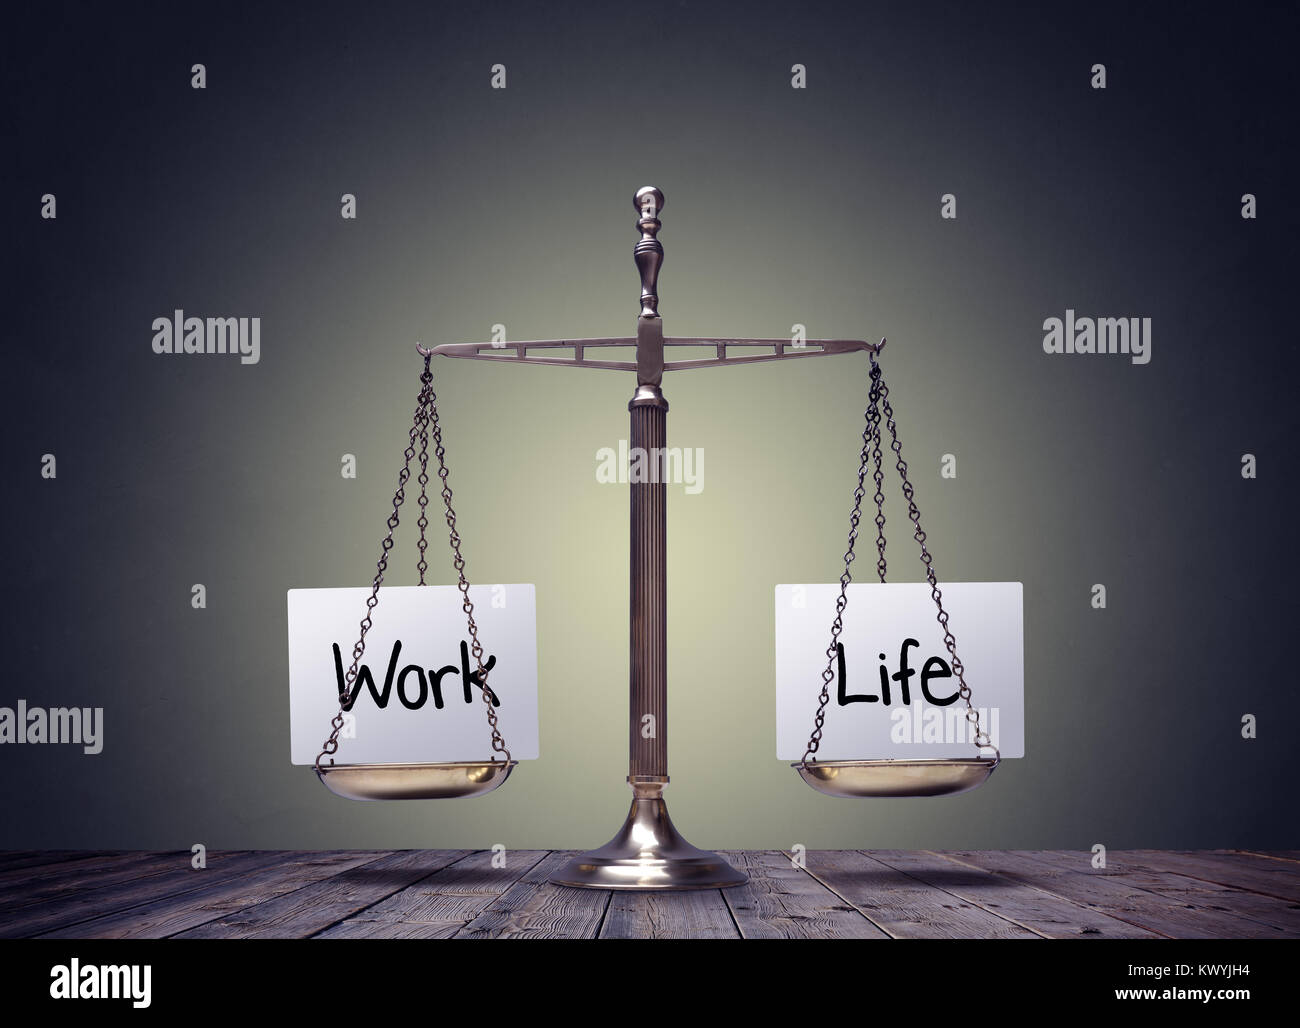 Work life balance scales business and family lifestyle choice Stock Photo